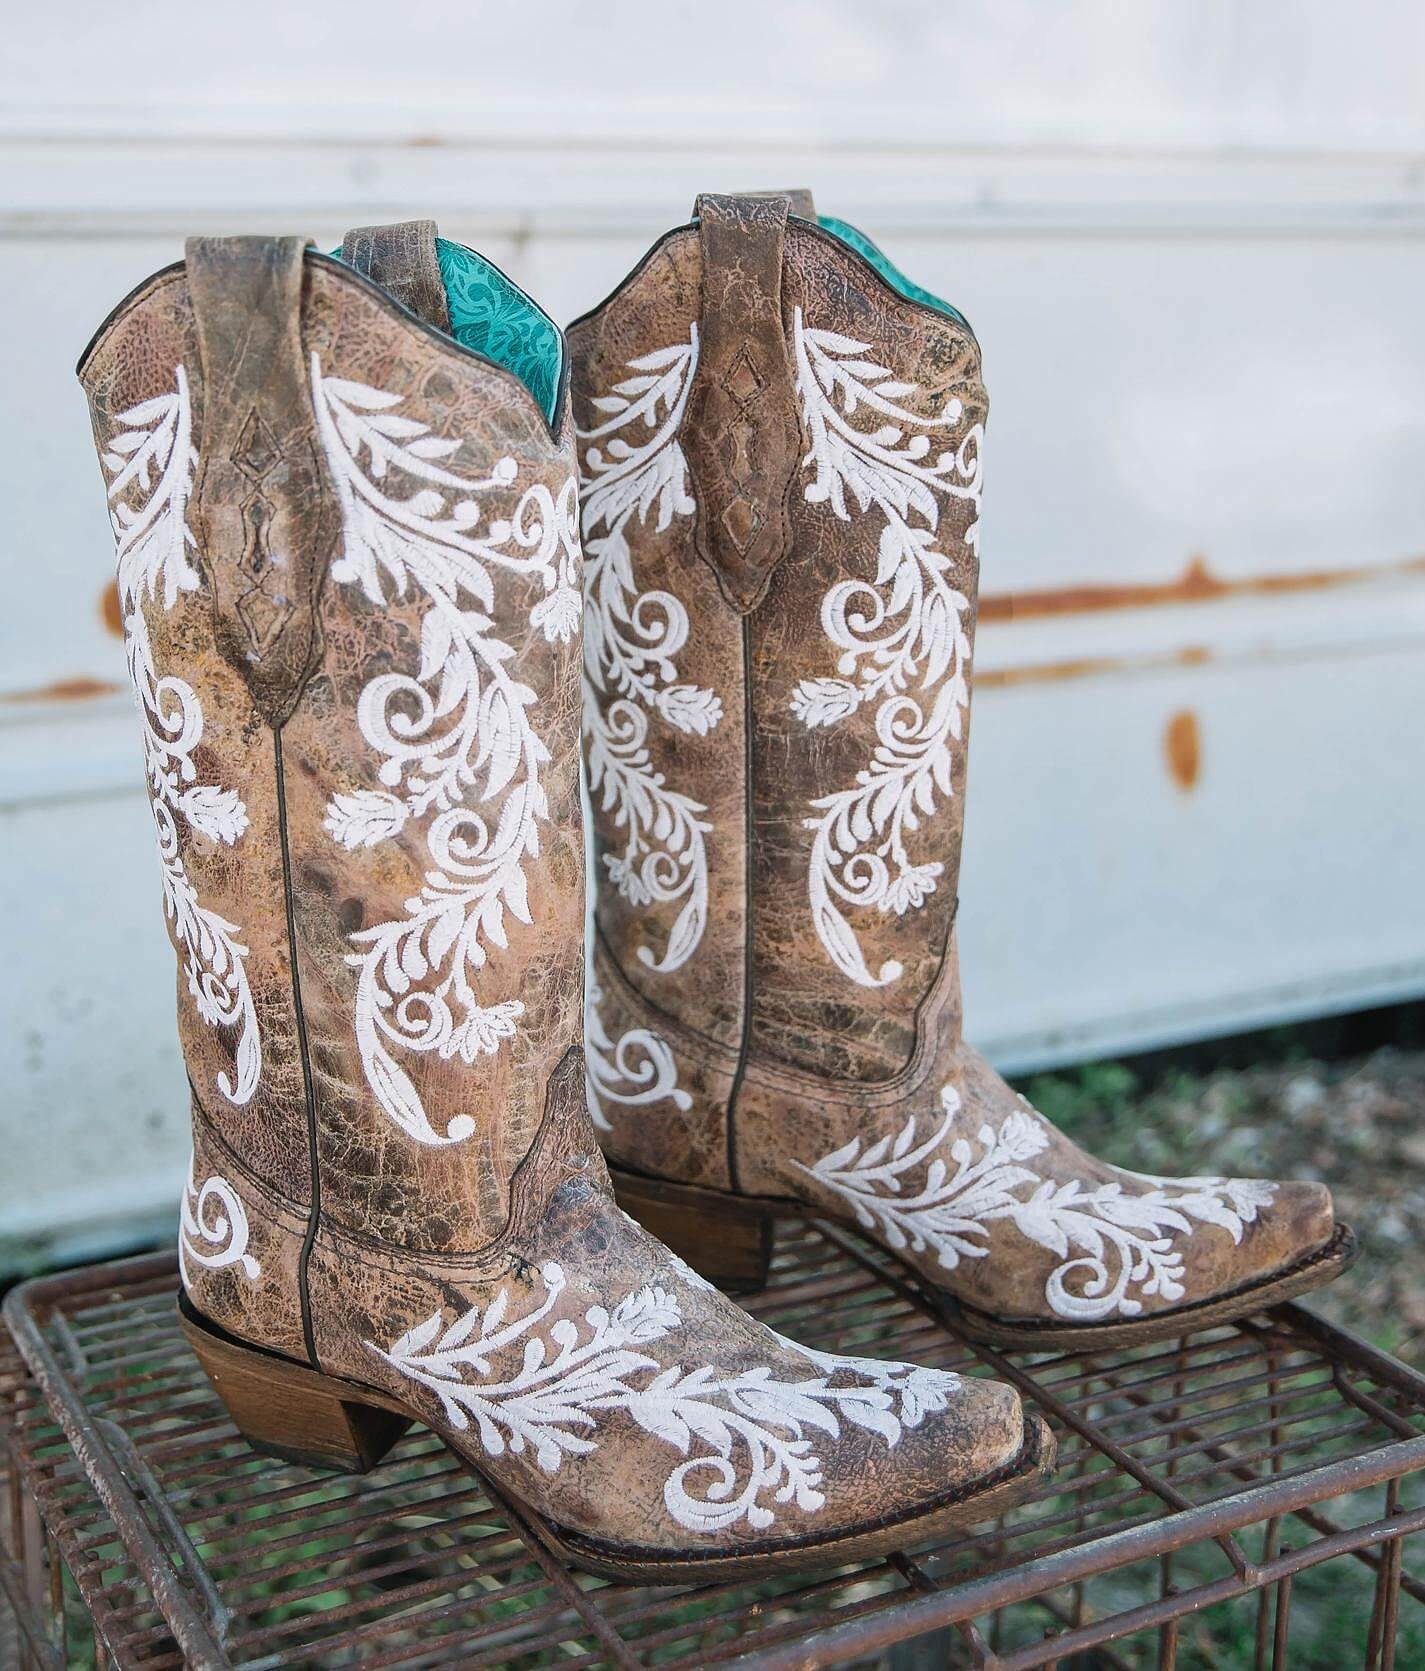 flower embroidered cowboy boots